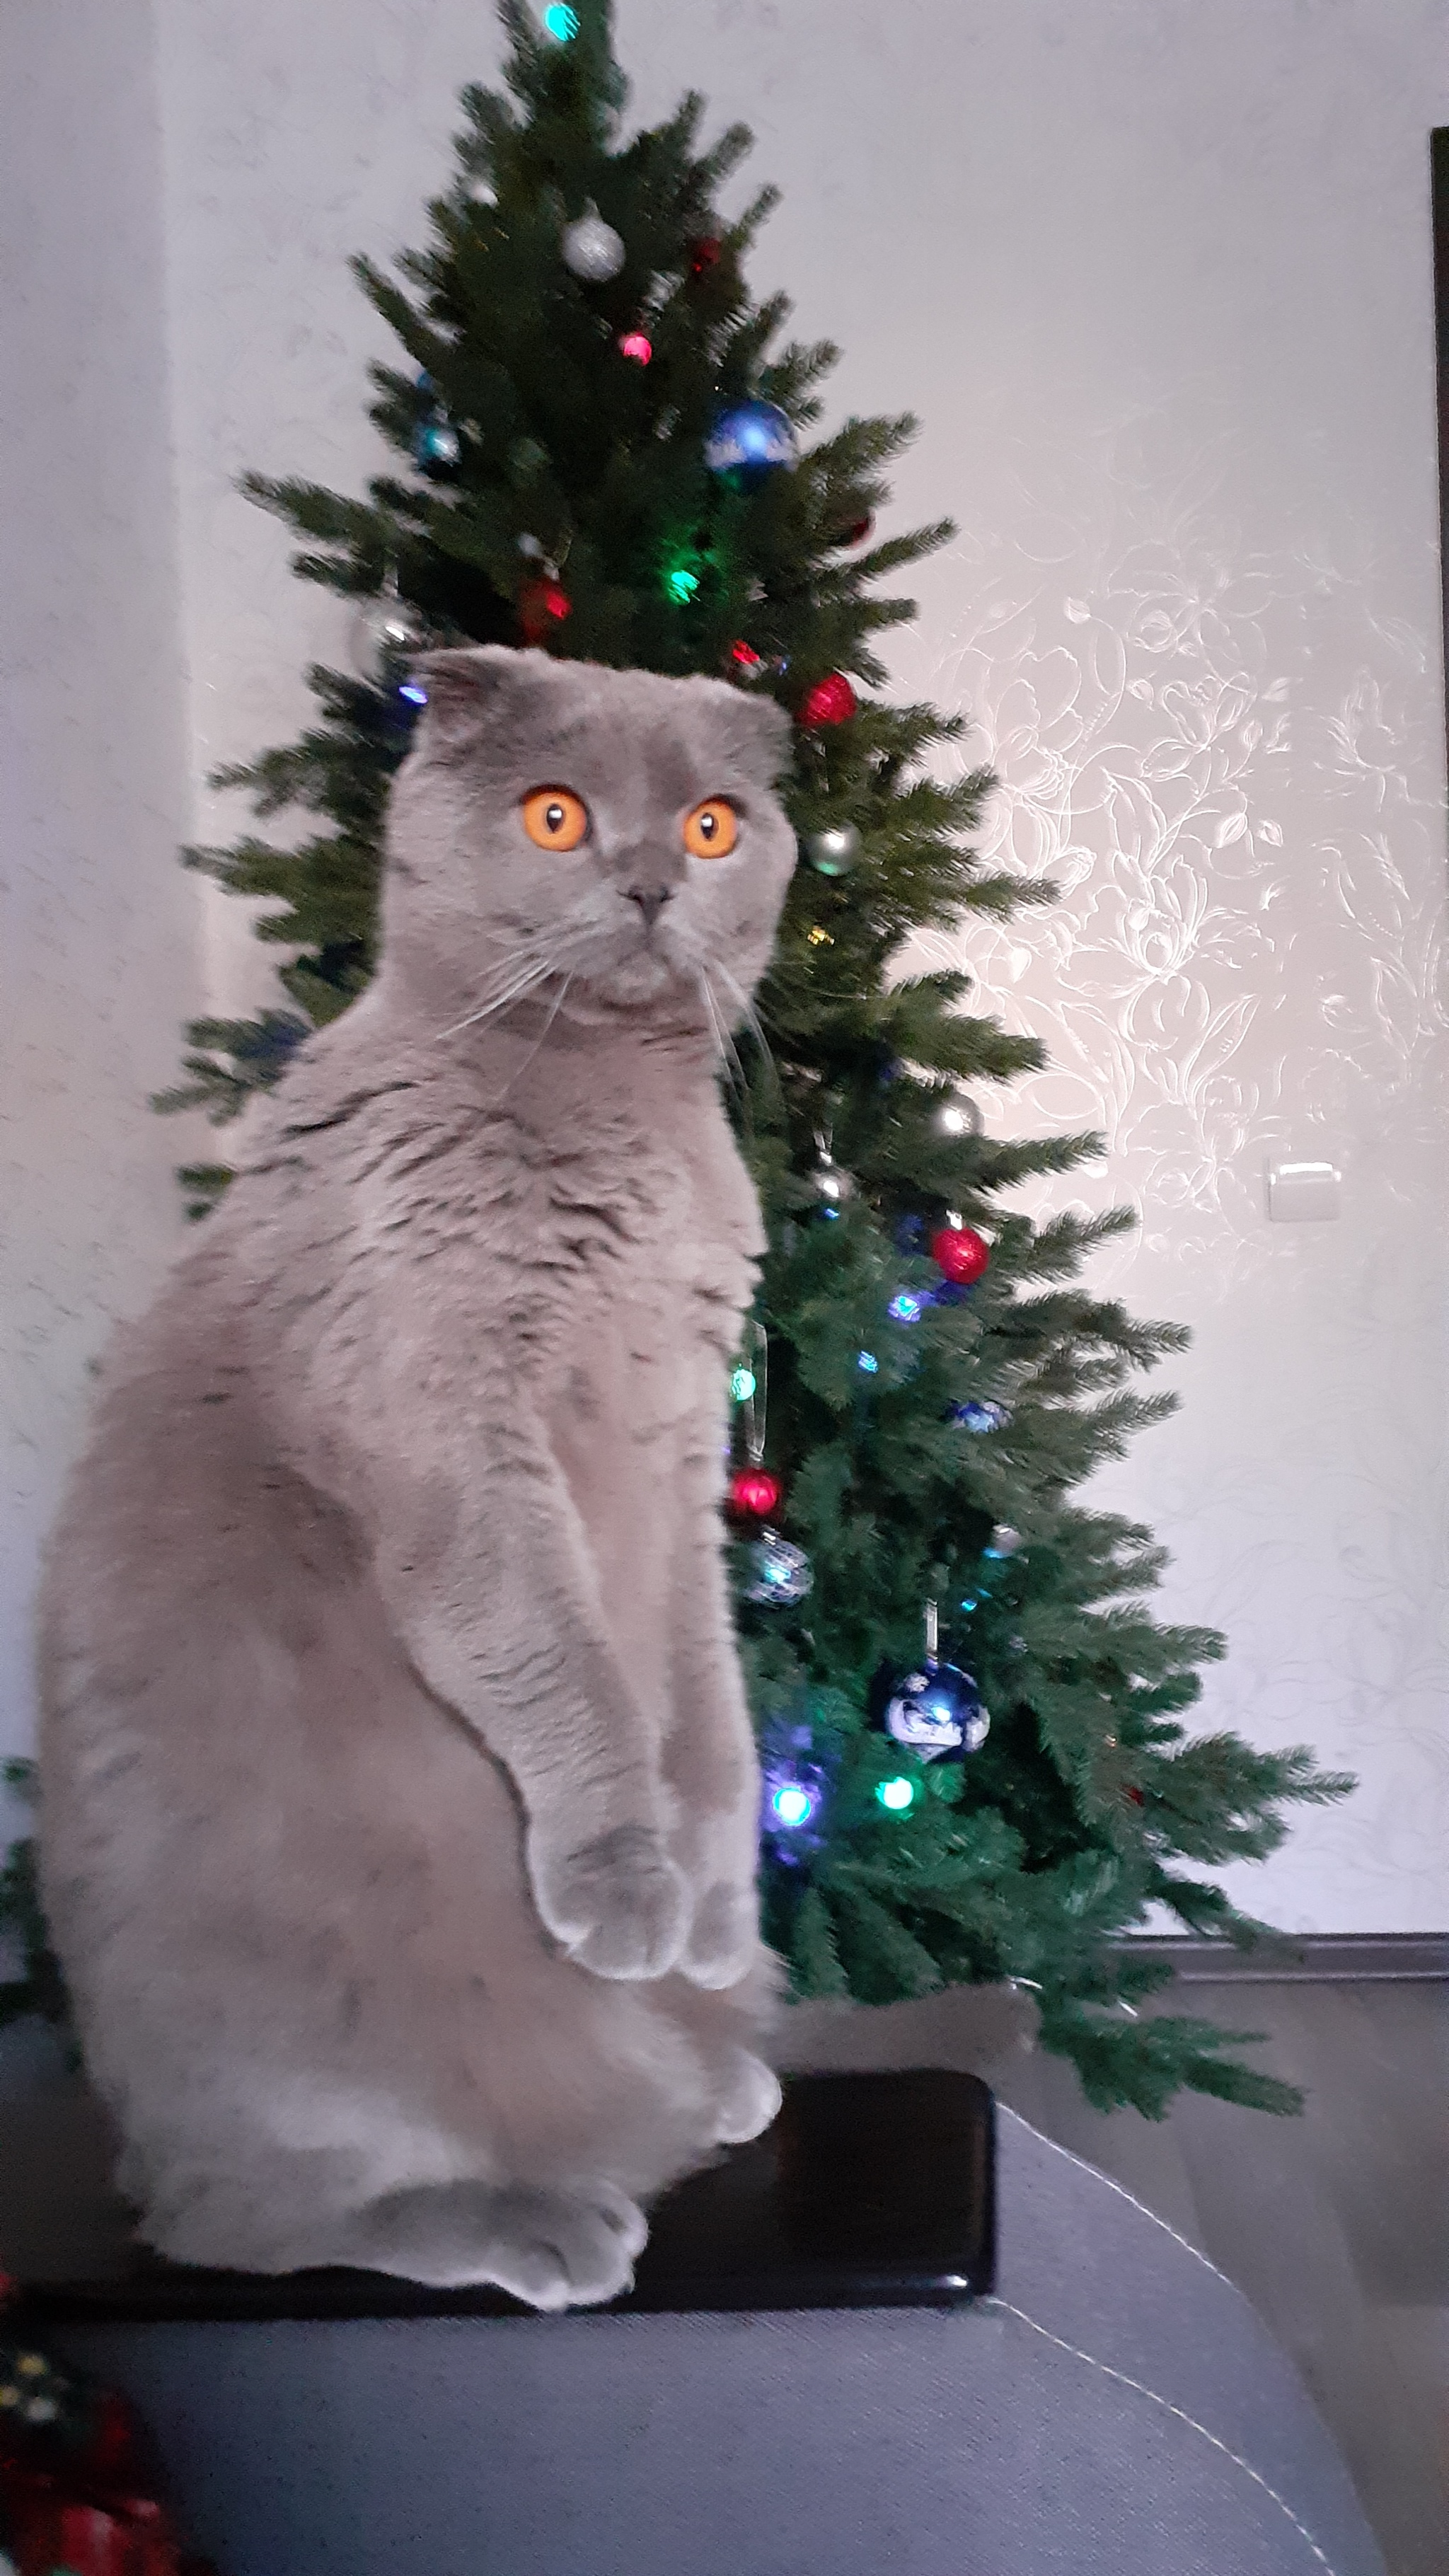 How is the new year coming soon? - My, cat, New Year, Christmas trees, Longpost